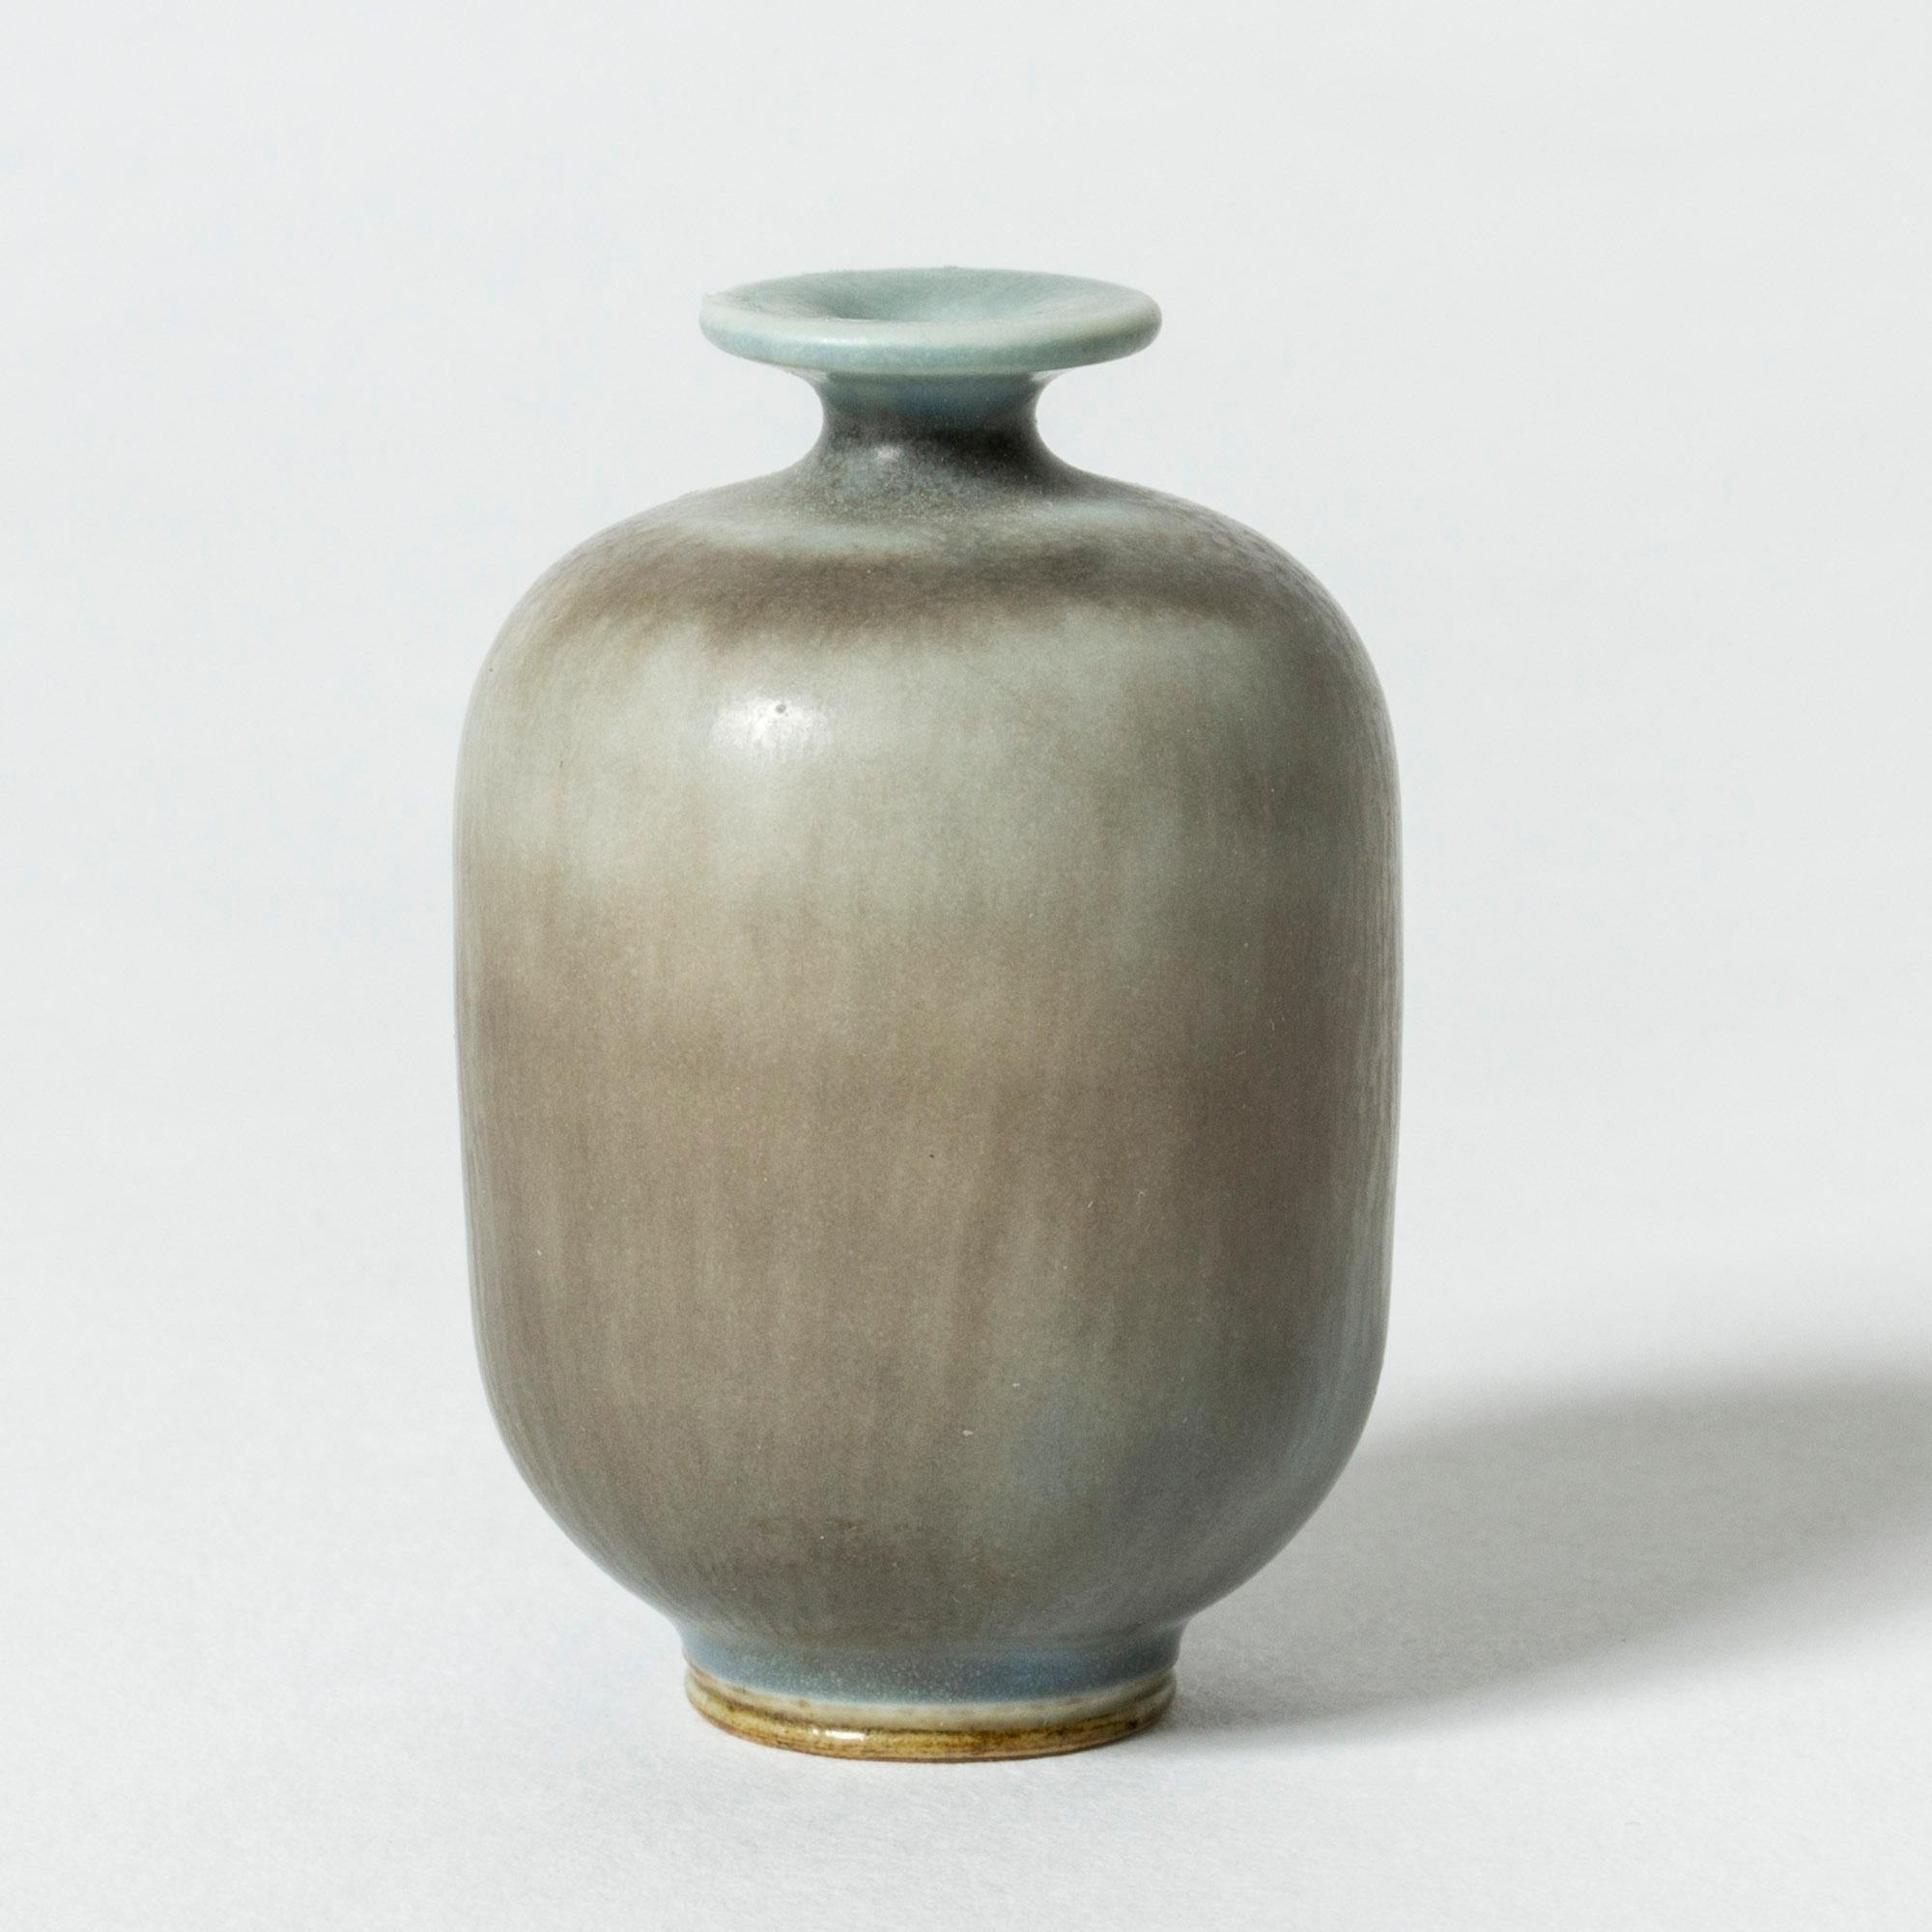 Miniature stoneware vase by Berndt Friberg, in a plump design. Pale blue hare’s fur glaze blended with brown streaks.